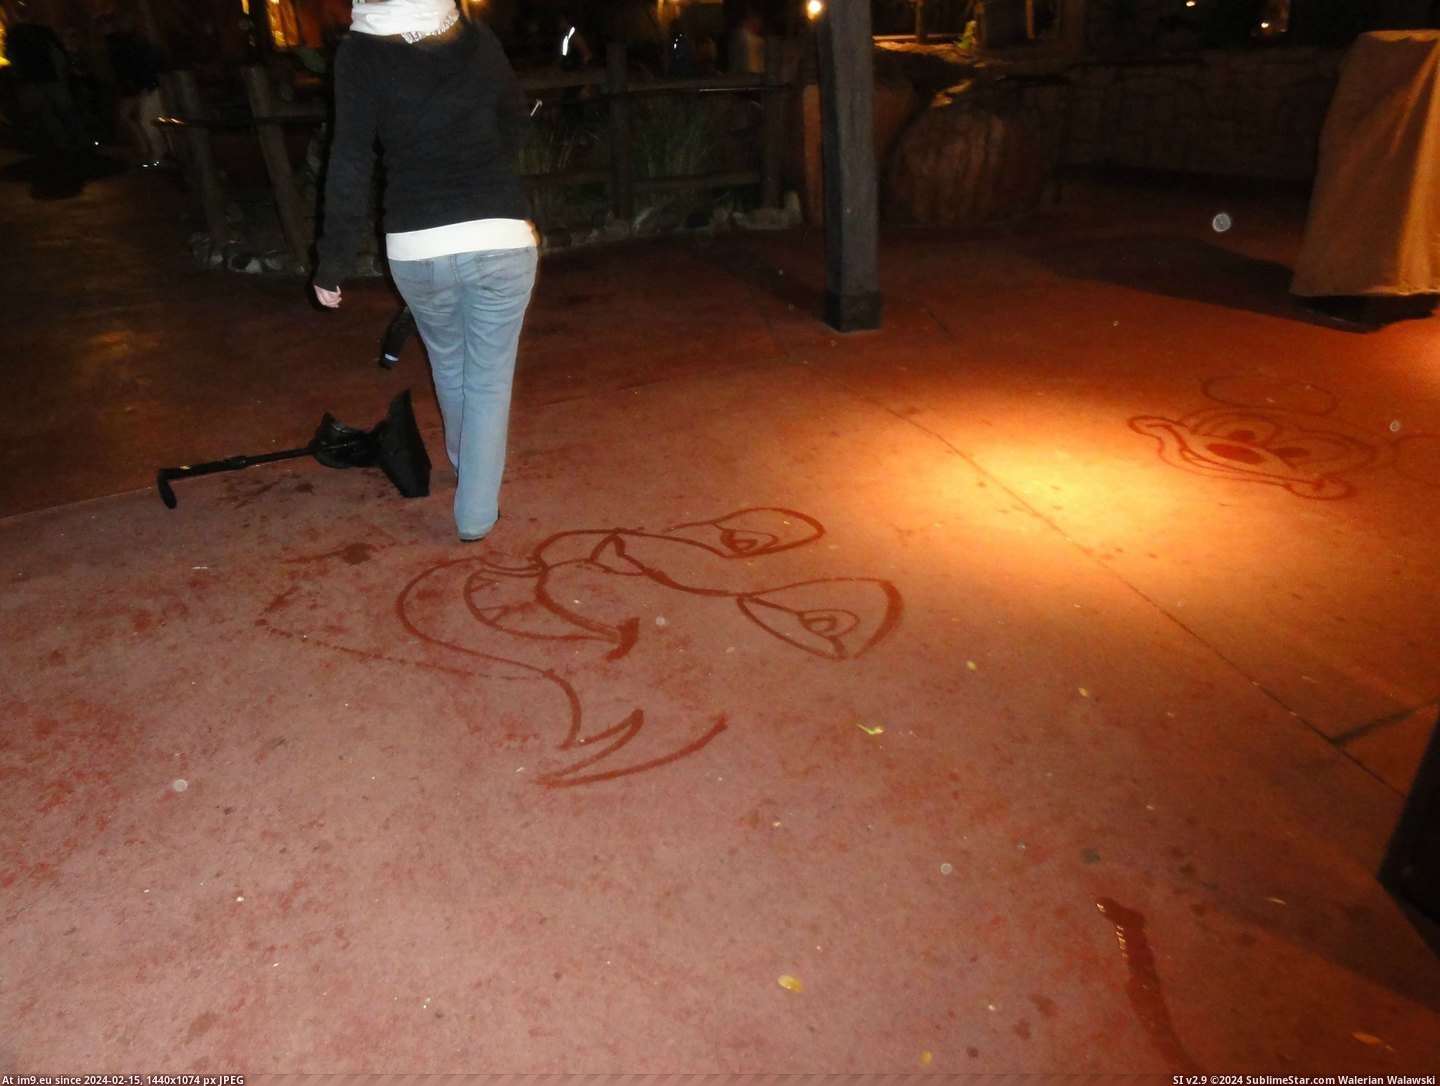 #World #Water #Disney #Guests #Janitor #Broom #Entertain #Characters #Drew #Sidewalk [Pics] As a janitor at Disney World, I drew characters with water and a broom on the sidewalk to entertain guests. 5 Pic. (Image of album My r/PICS favs))